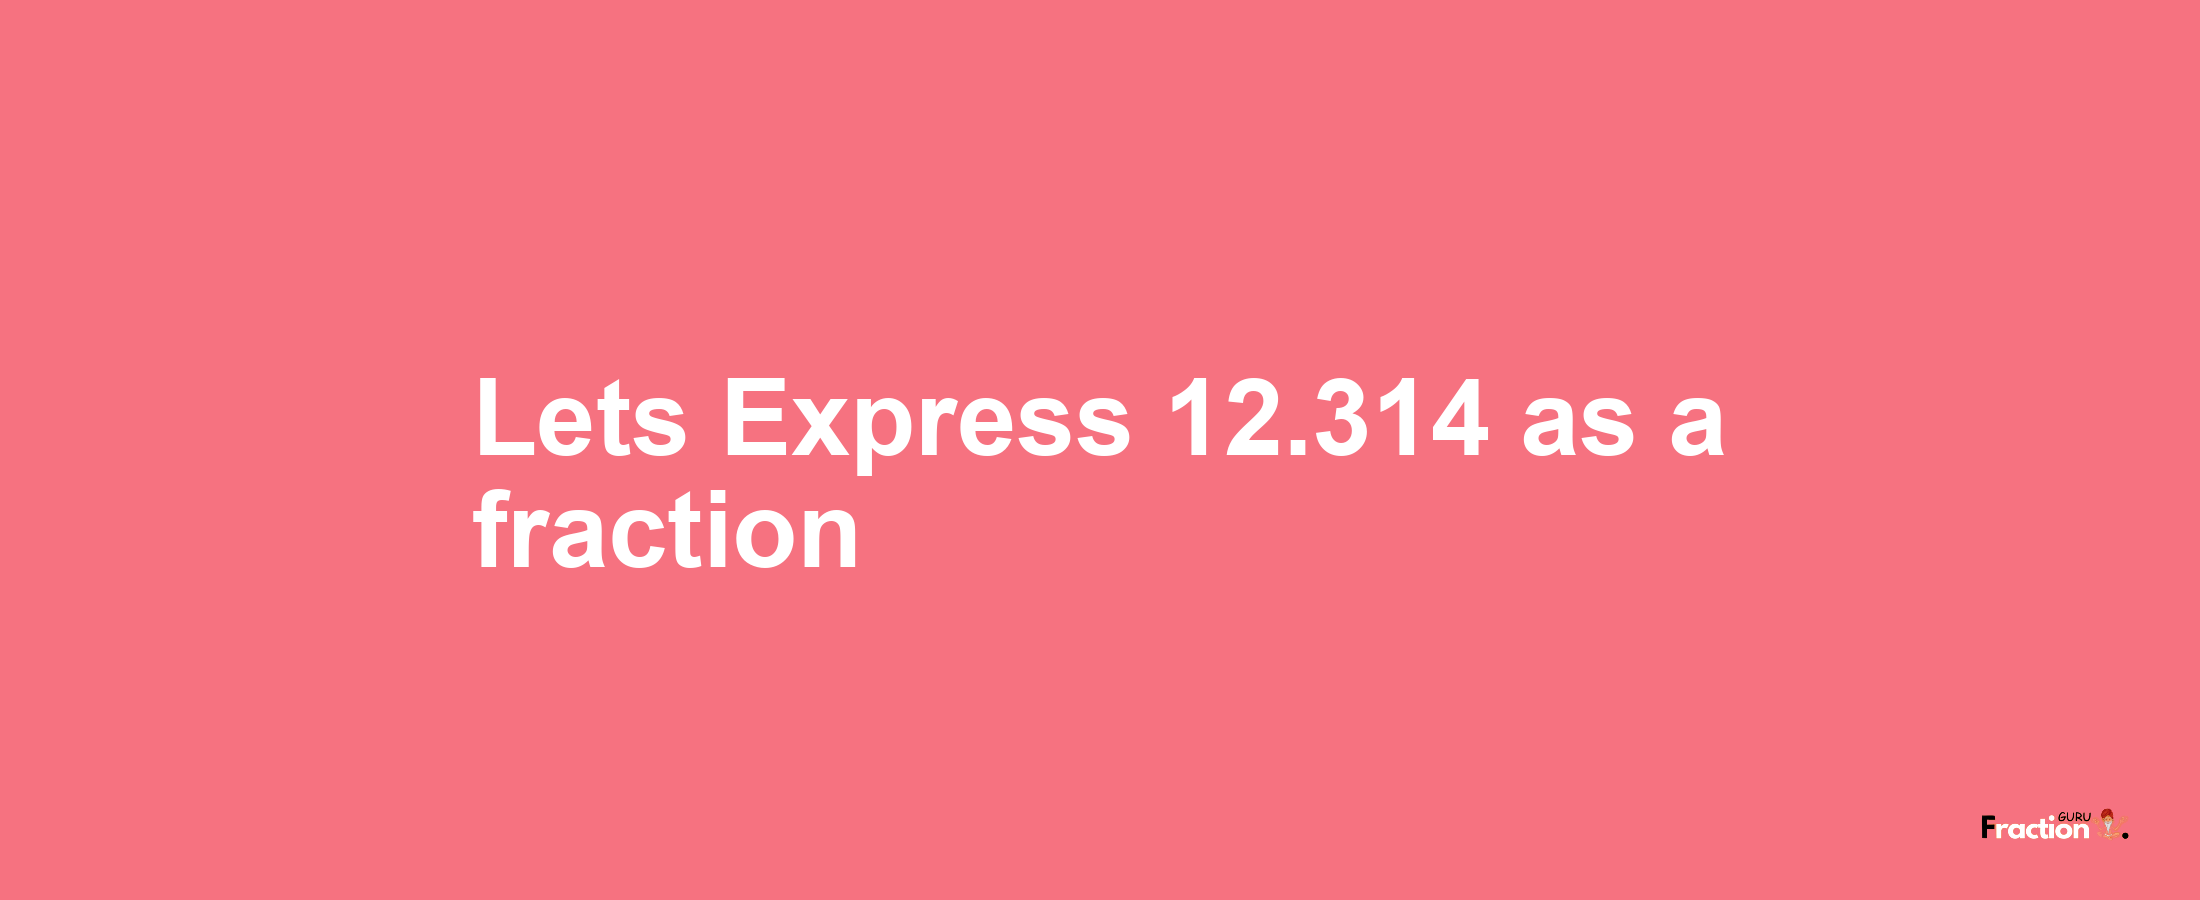 Lets Express 12.314 as afraction